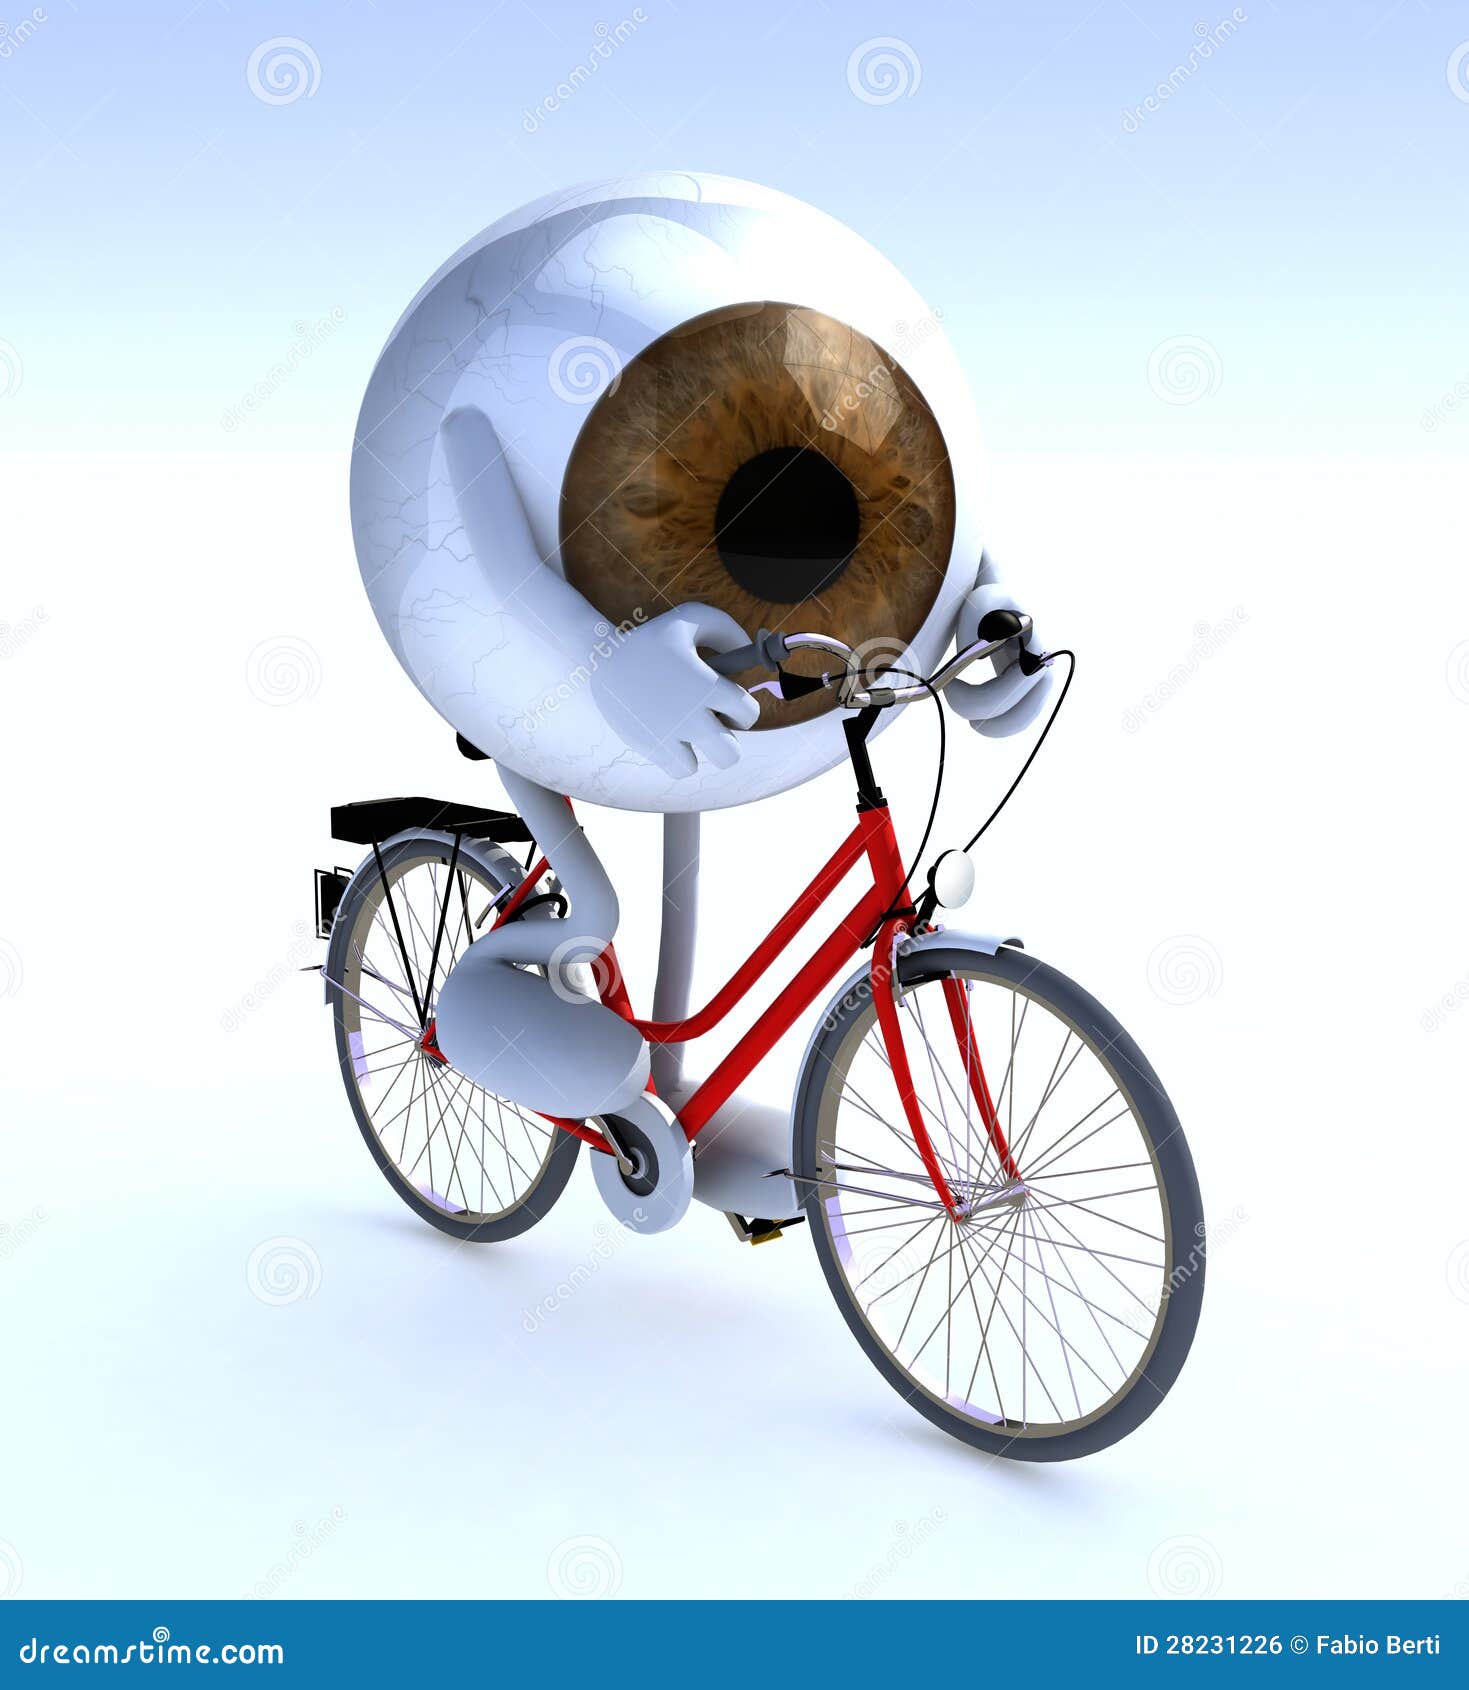 eye with arms and legs riding a bycicle